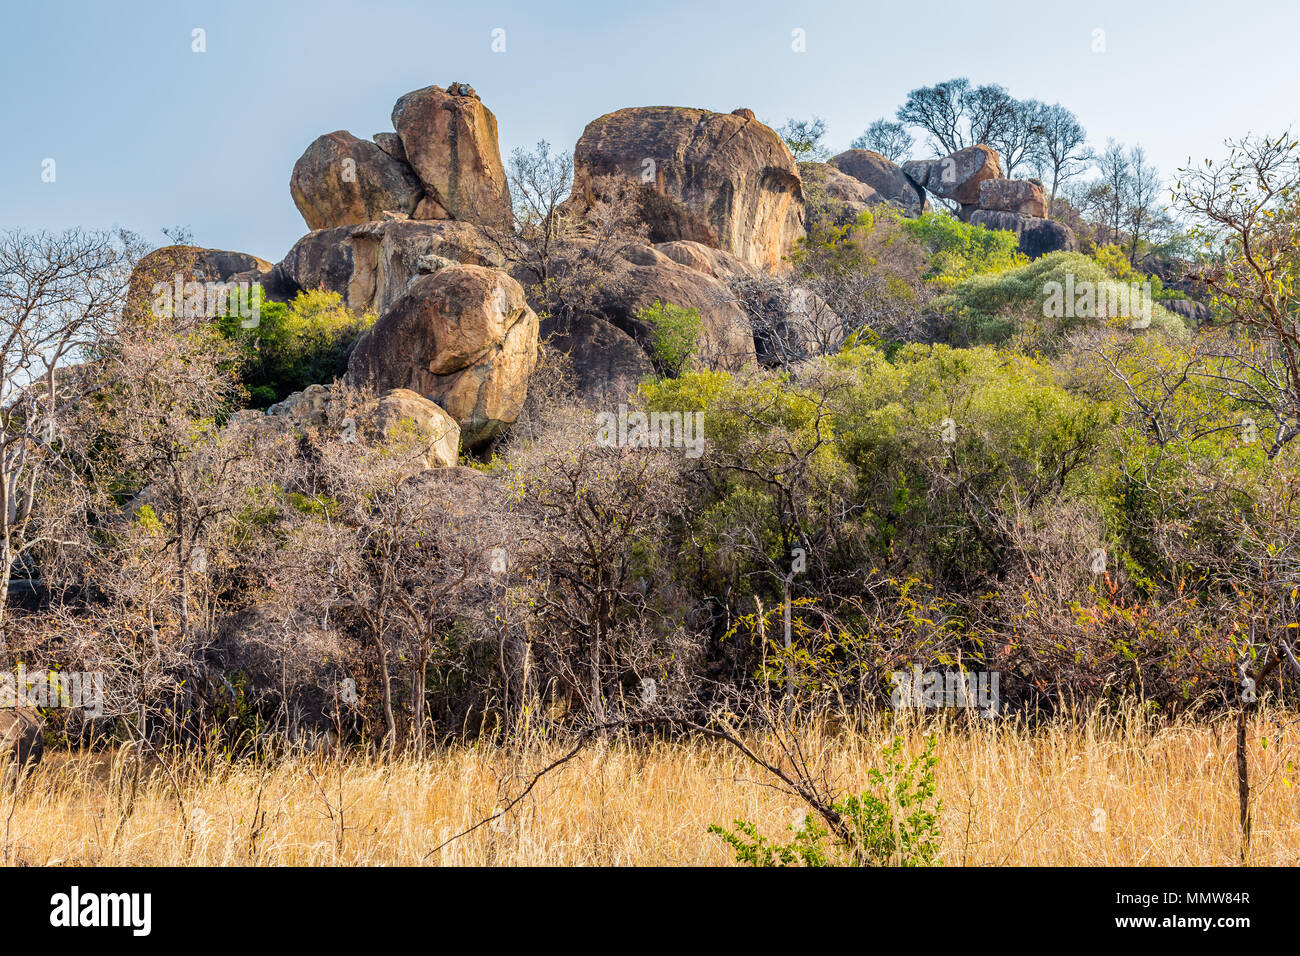 Balancing rocks in Matobo National Park, Zimbabwe, formed by millions of years of weathering. Stock Photo